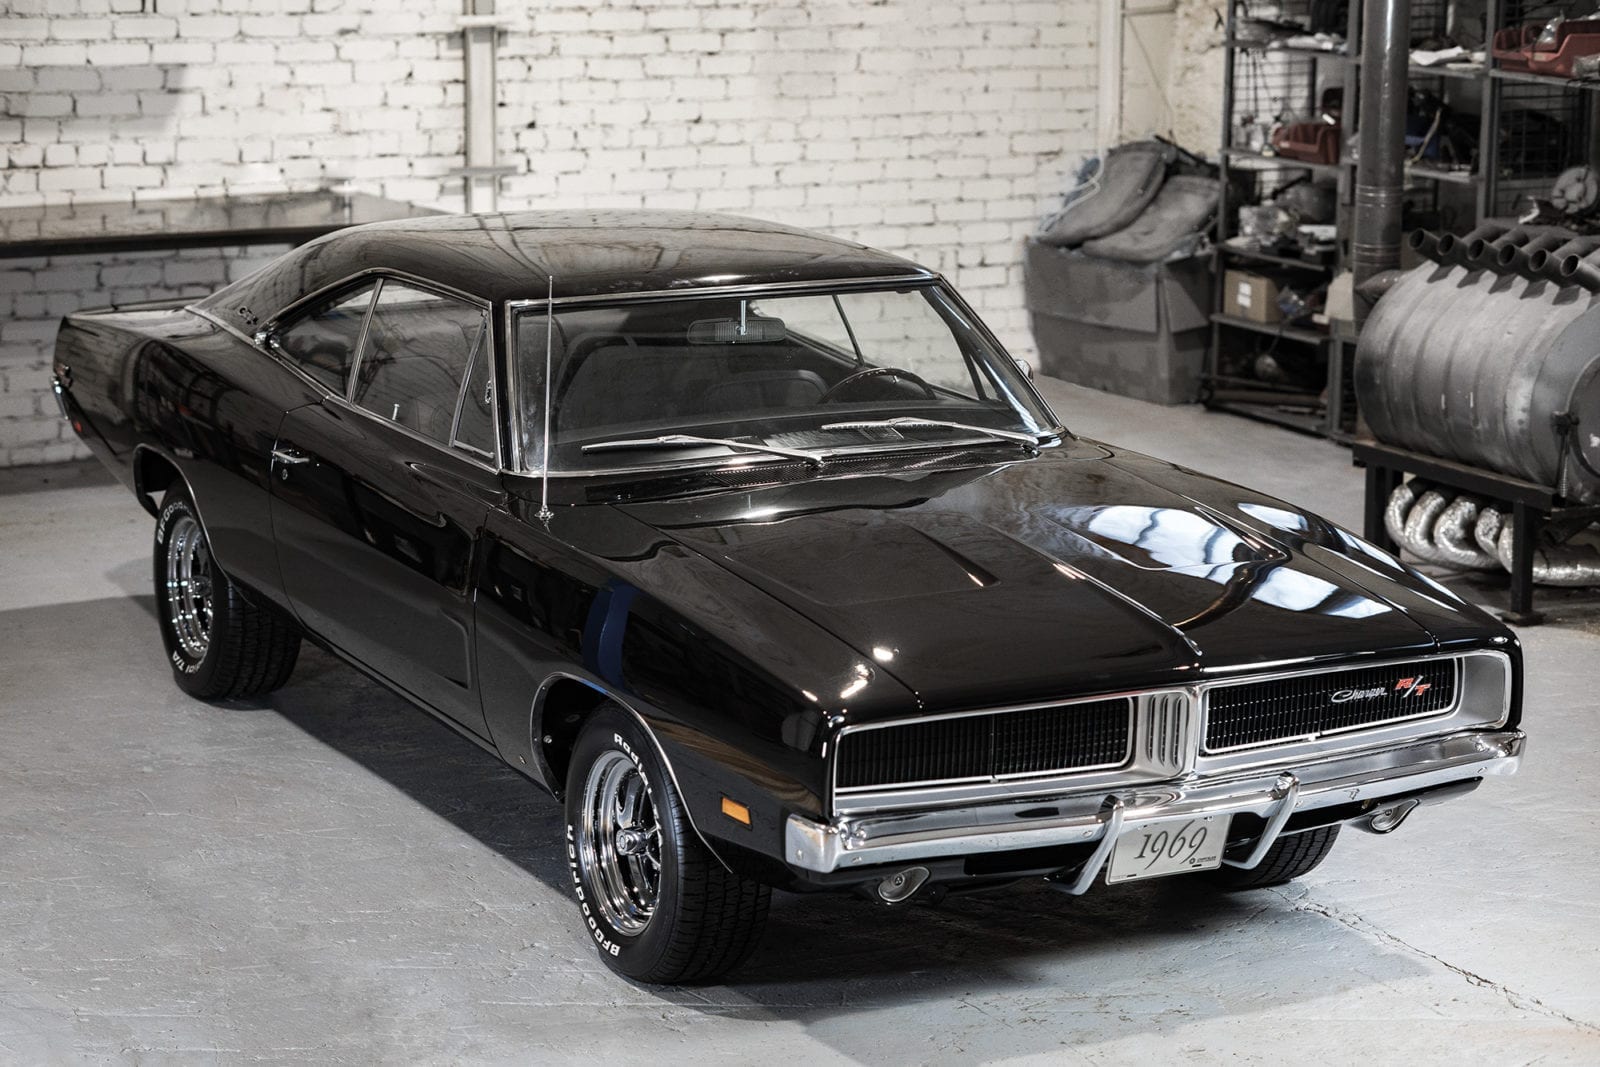 Dodge Charger front